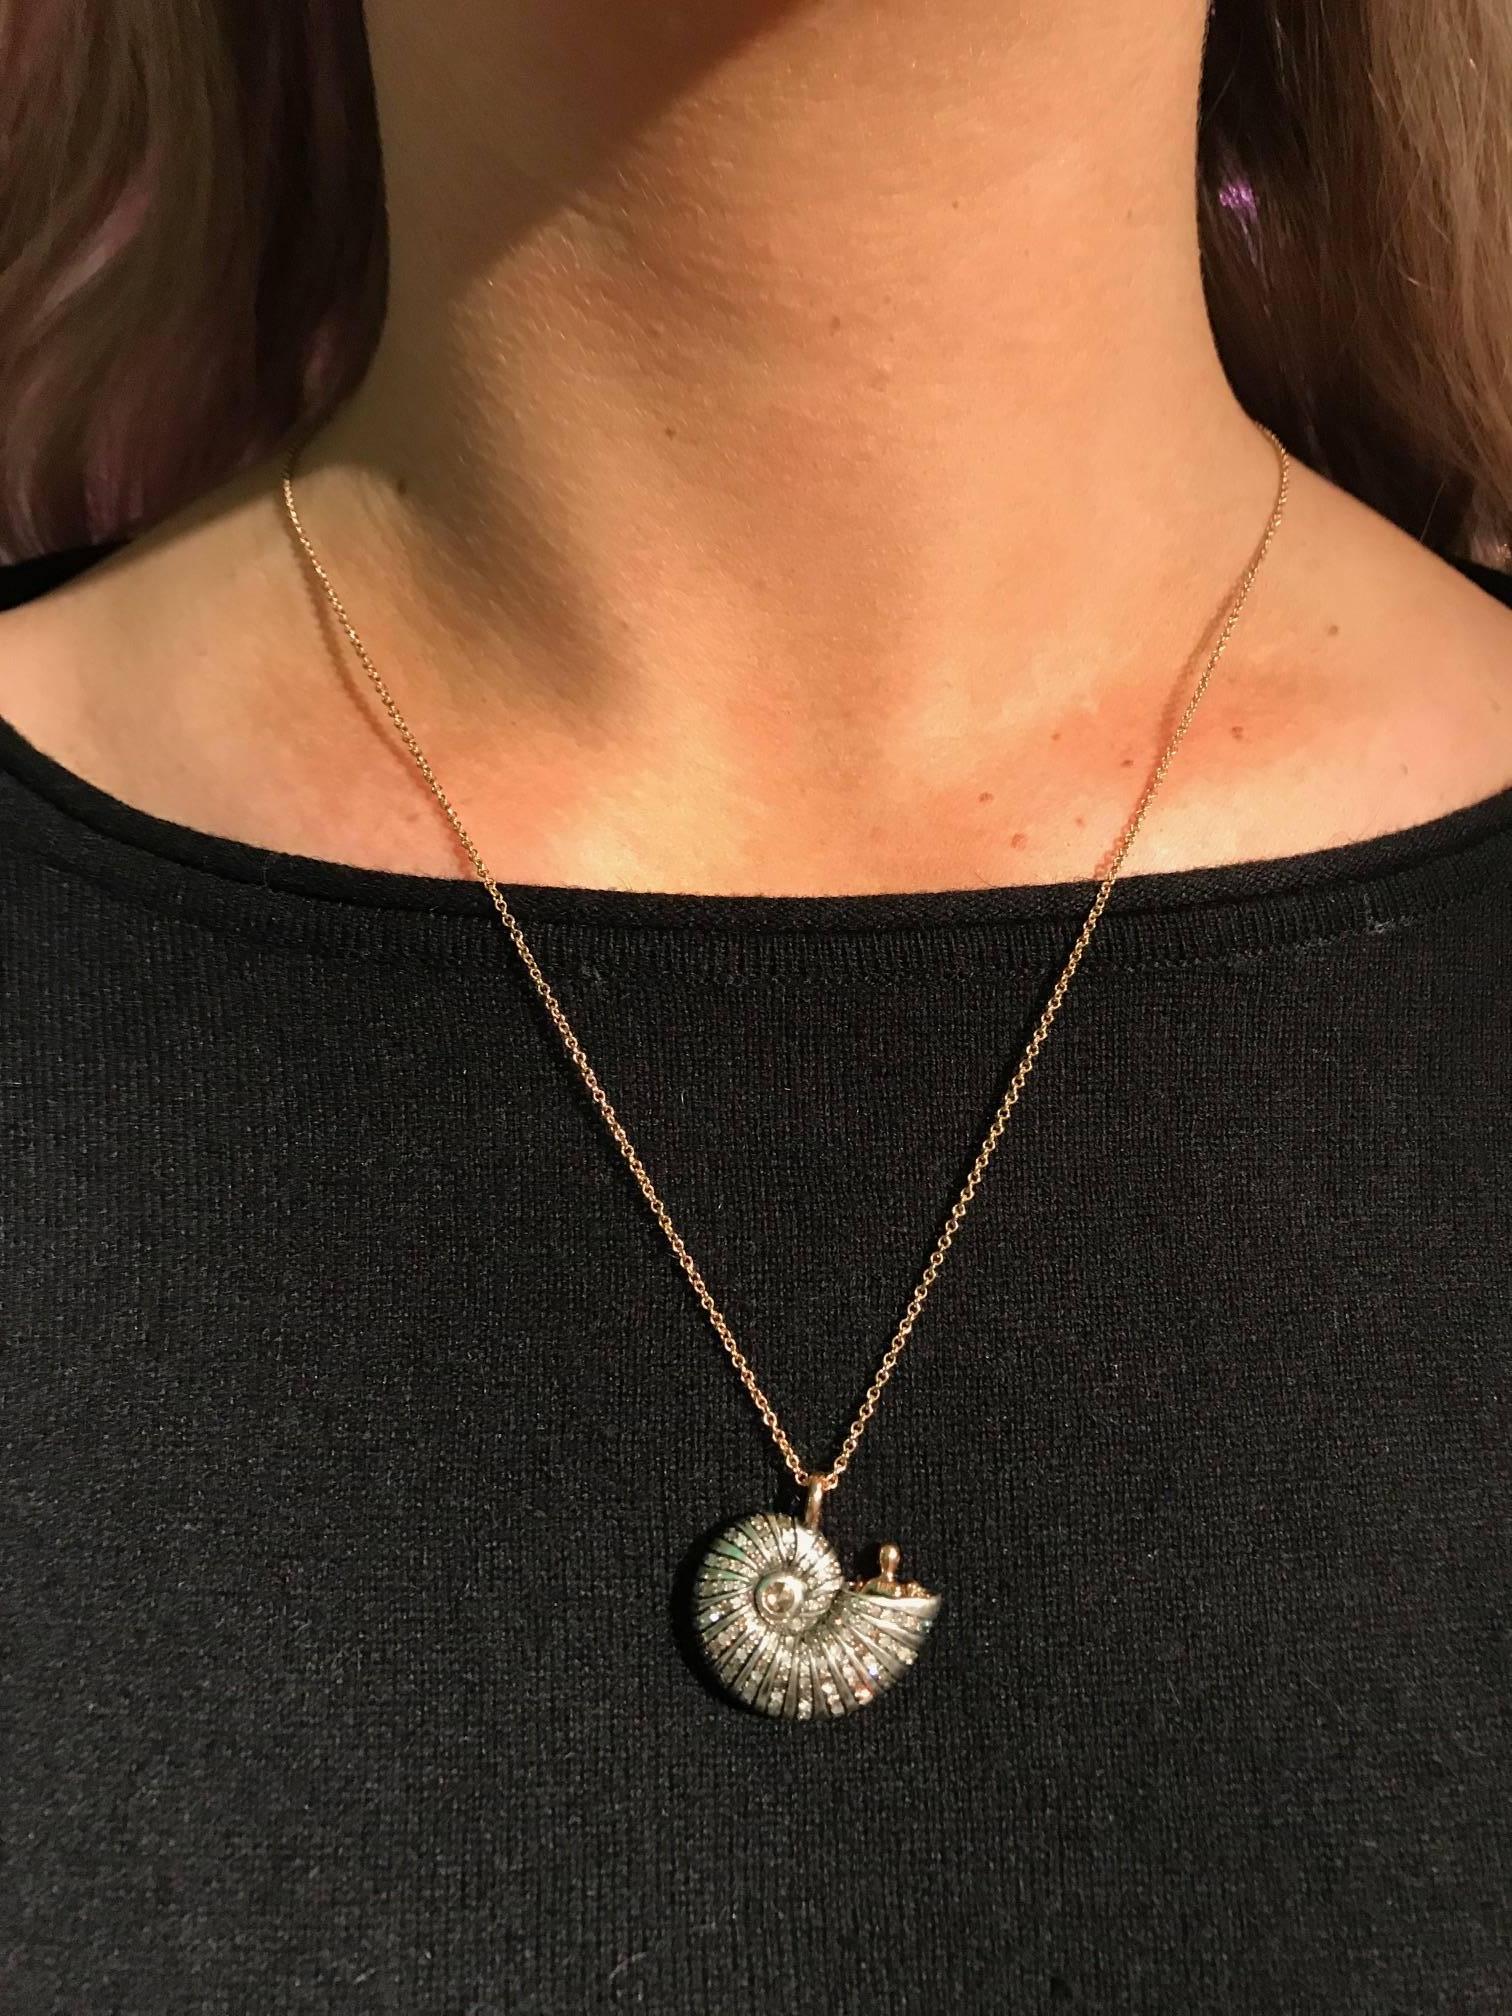 The 'Poseidon's Getaway' Necklace by Bibi van der Velden, includes a Sterling Silver shell, set with brown diamonds, rose cut diamonds, and blue and green shades of sapphires. It includes an 18k rose gold man peeking out of the spiral shell, his